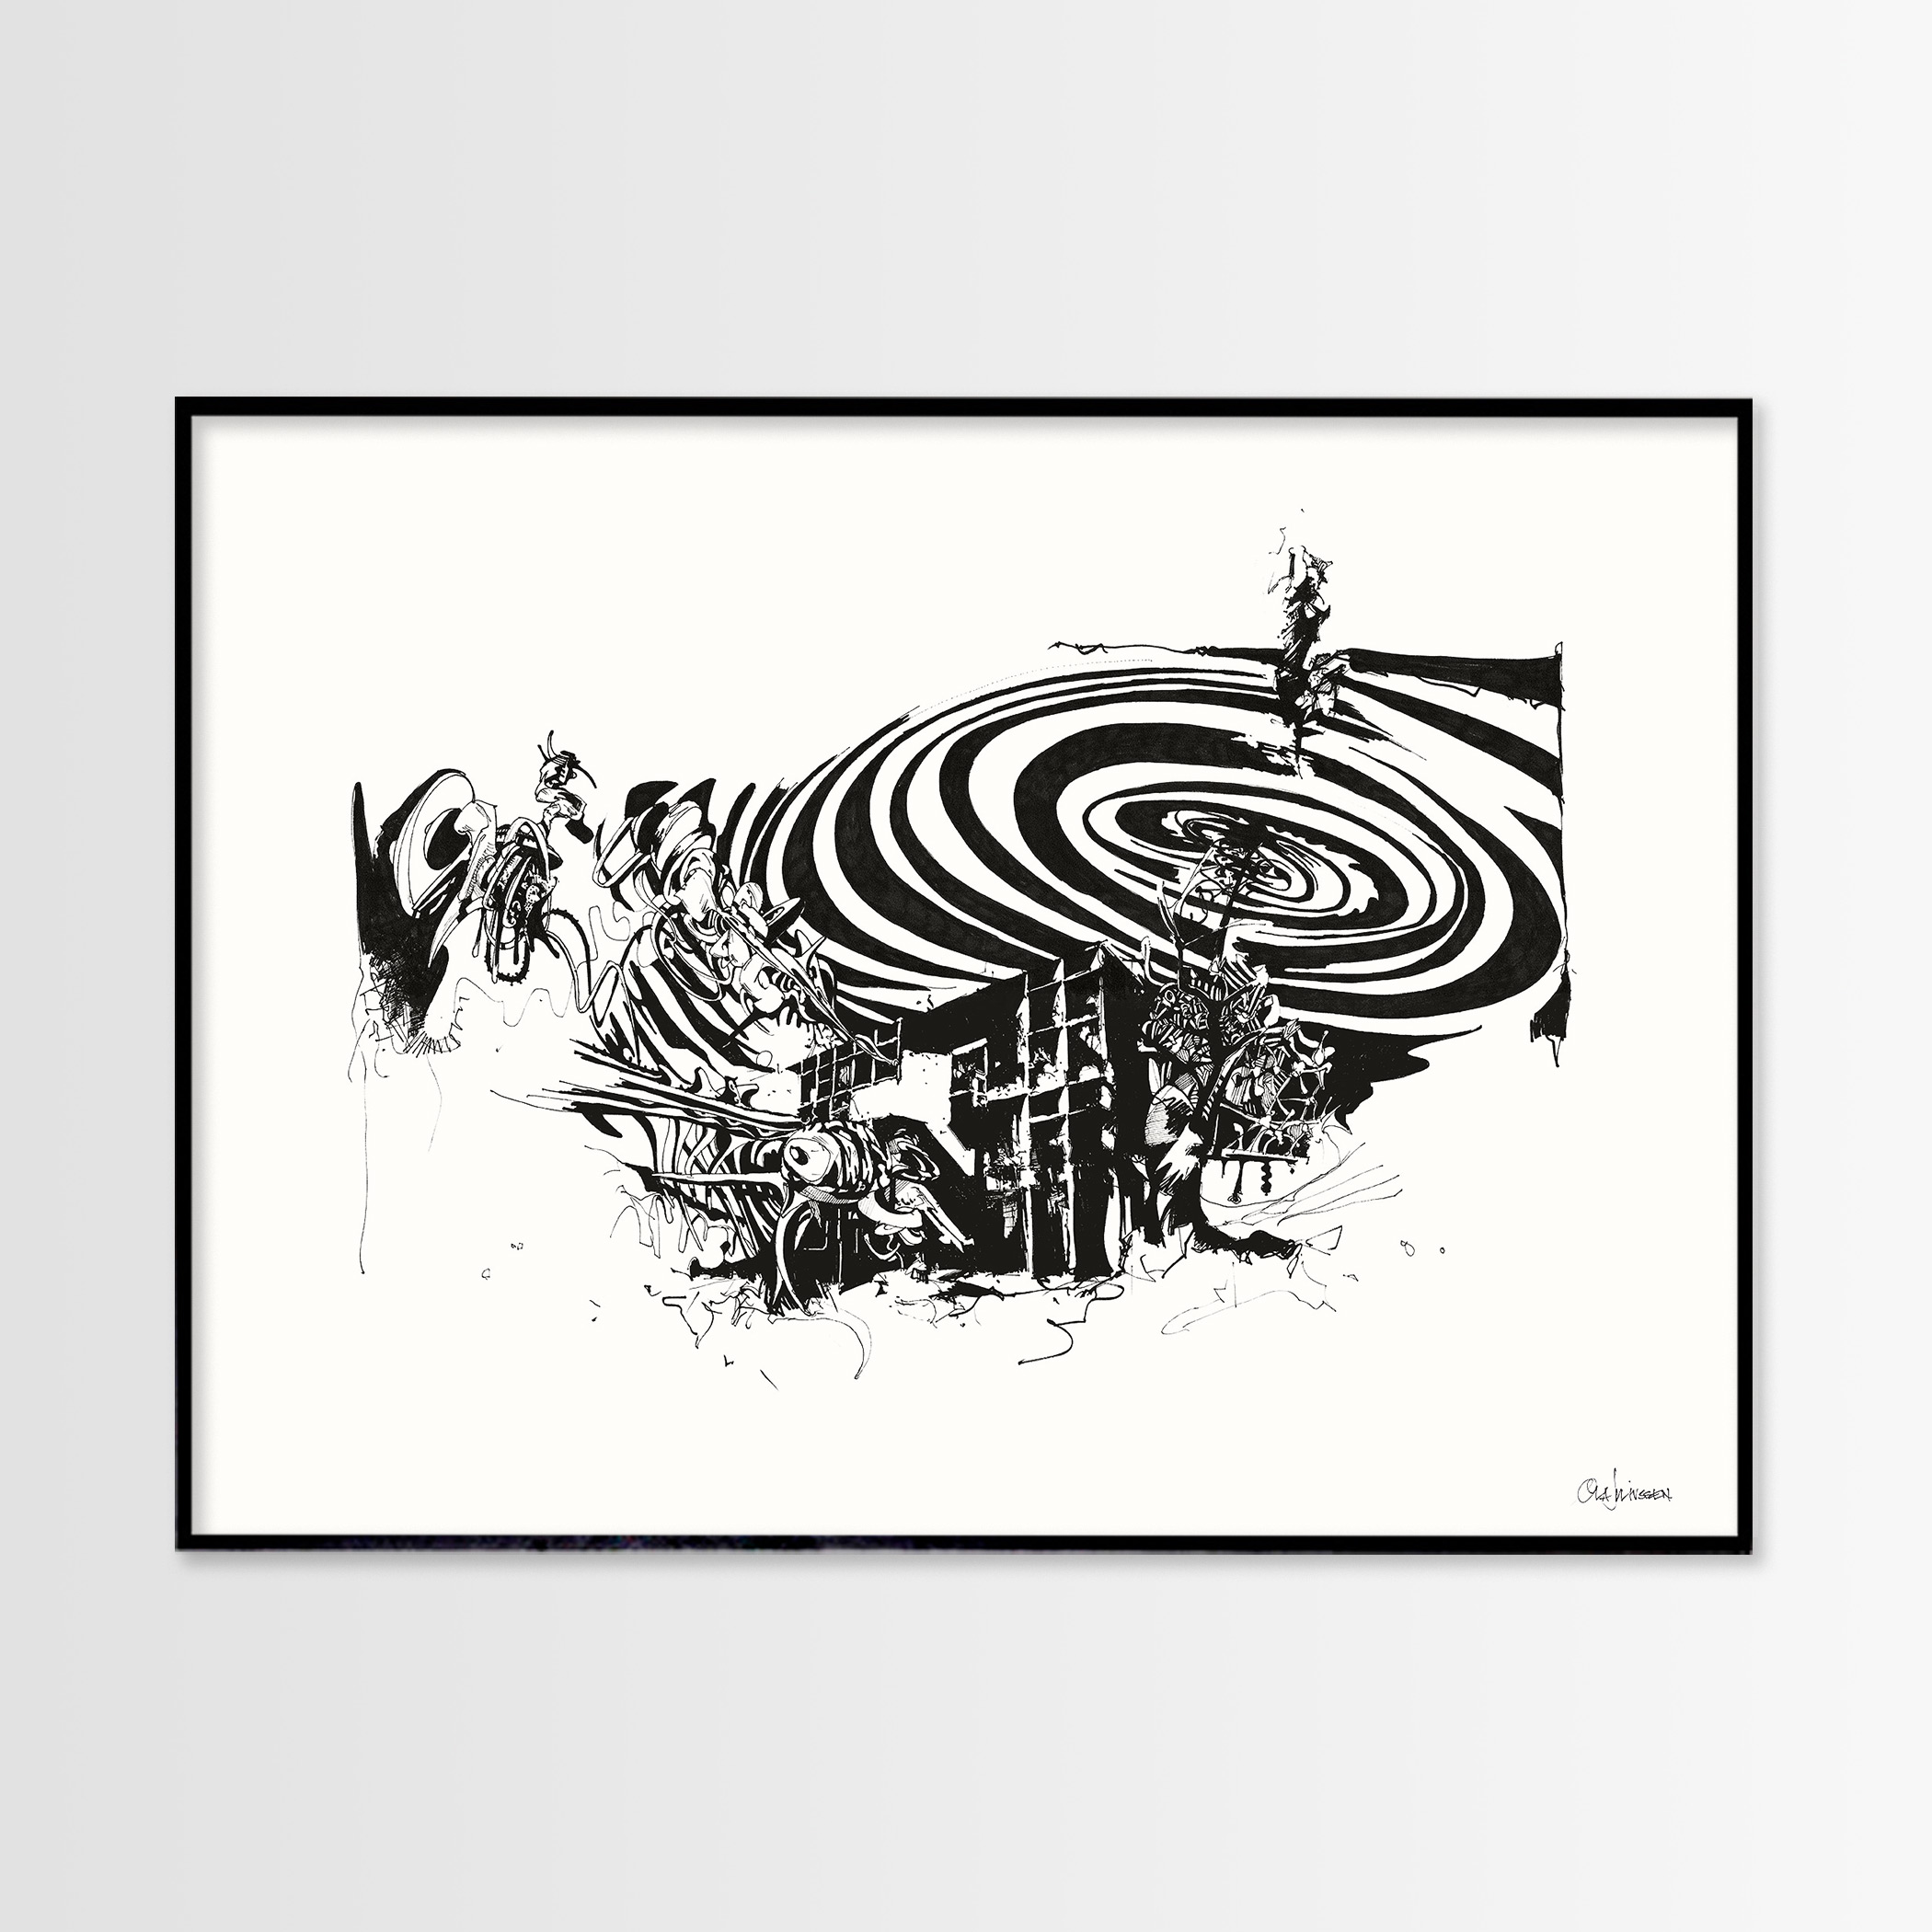 posters, giclee, abstract, graphical, landscape, monochrome, architecture, botany, patterns, black, white, ink, paper, abstract-forms, architectural, black-and-white, buildings, contemporary-art, danish, decorative, design, flowers, interior, interior-design, modern, modern-art, nordic, plants, posters, prints, scandinavien, Buy original high quality art. Paintings, drawings, limited edition prints & posters by talented artists.